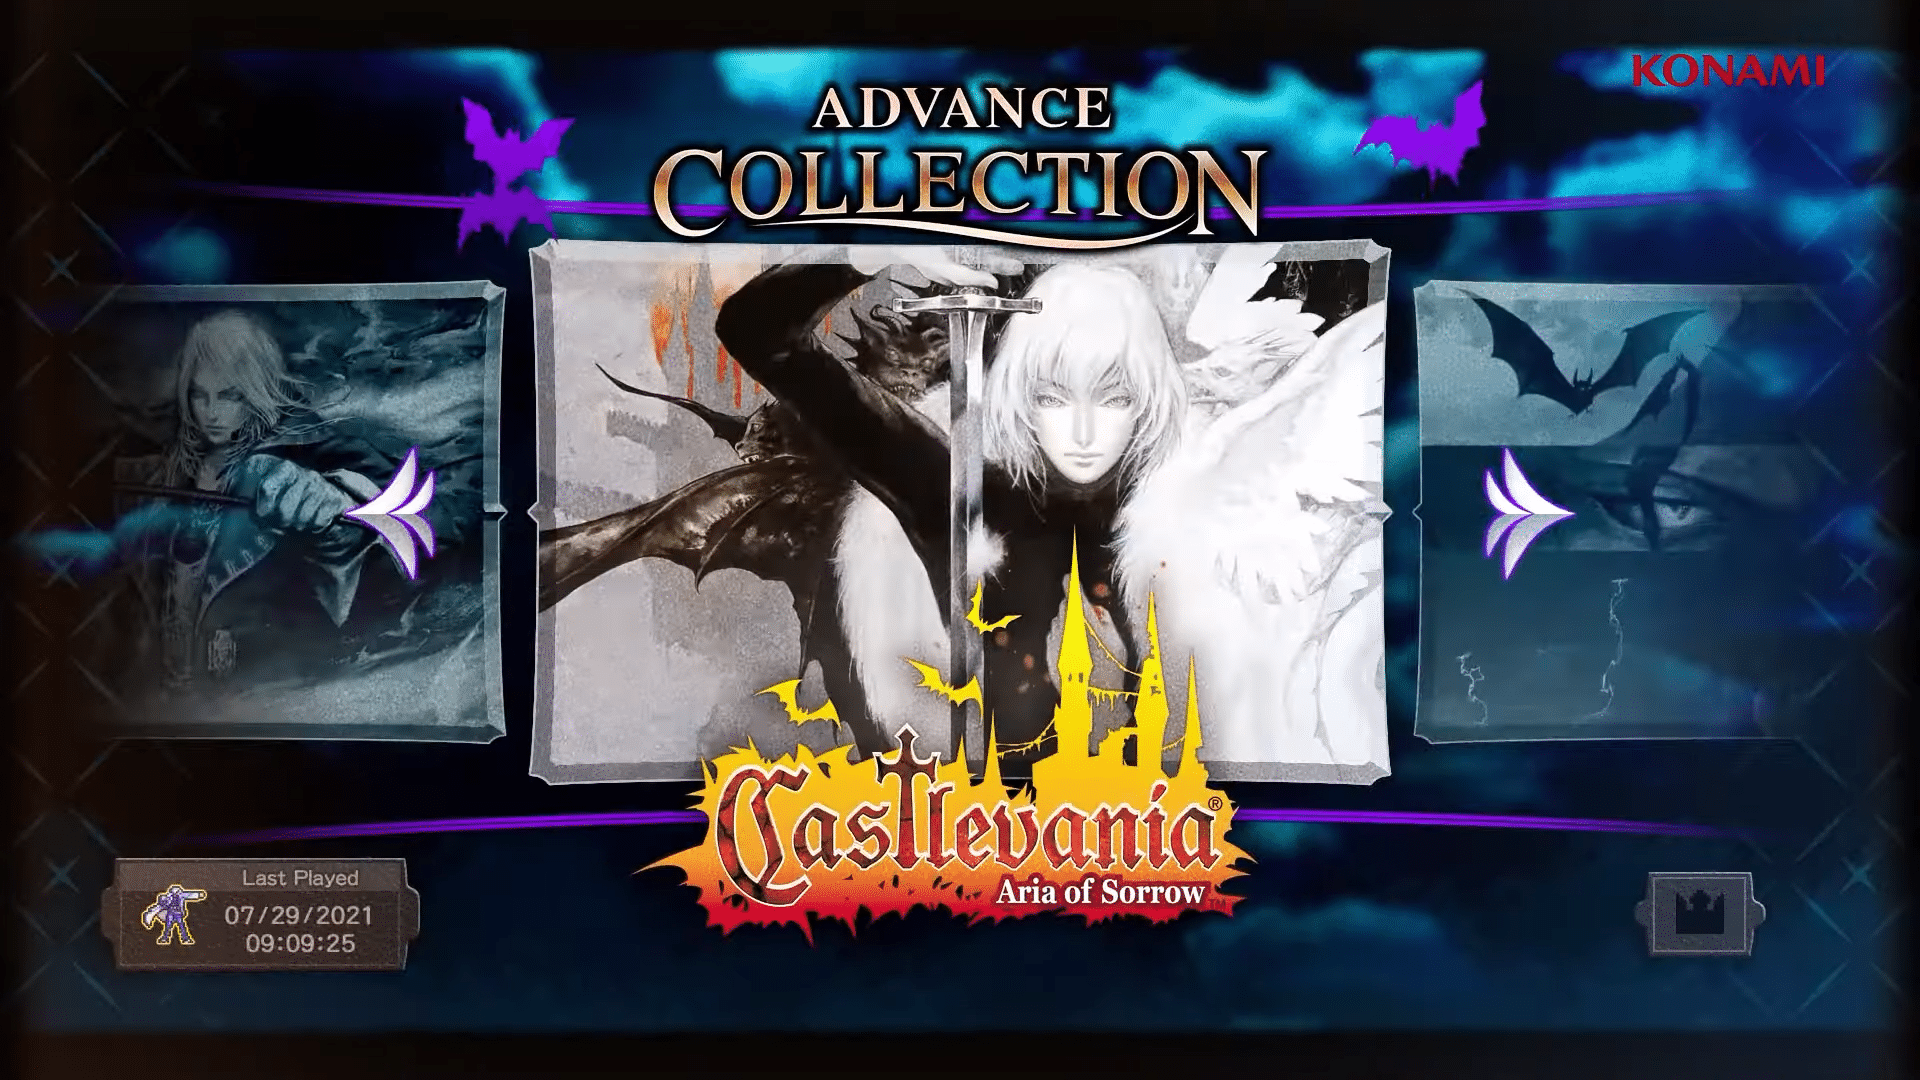 Castlevania Advance Collection is out for Nintendo Switch today